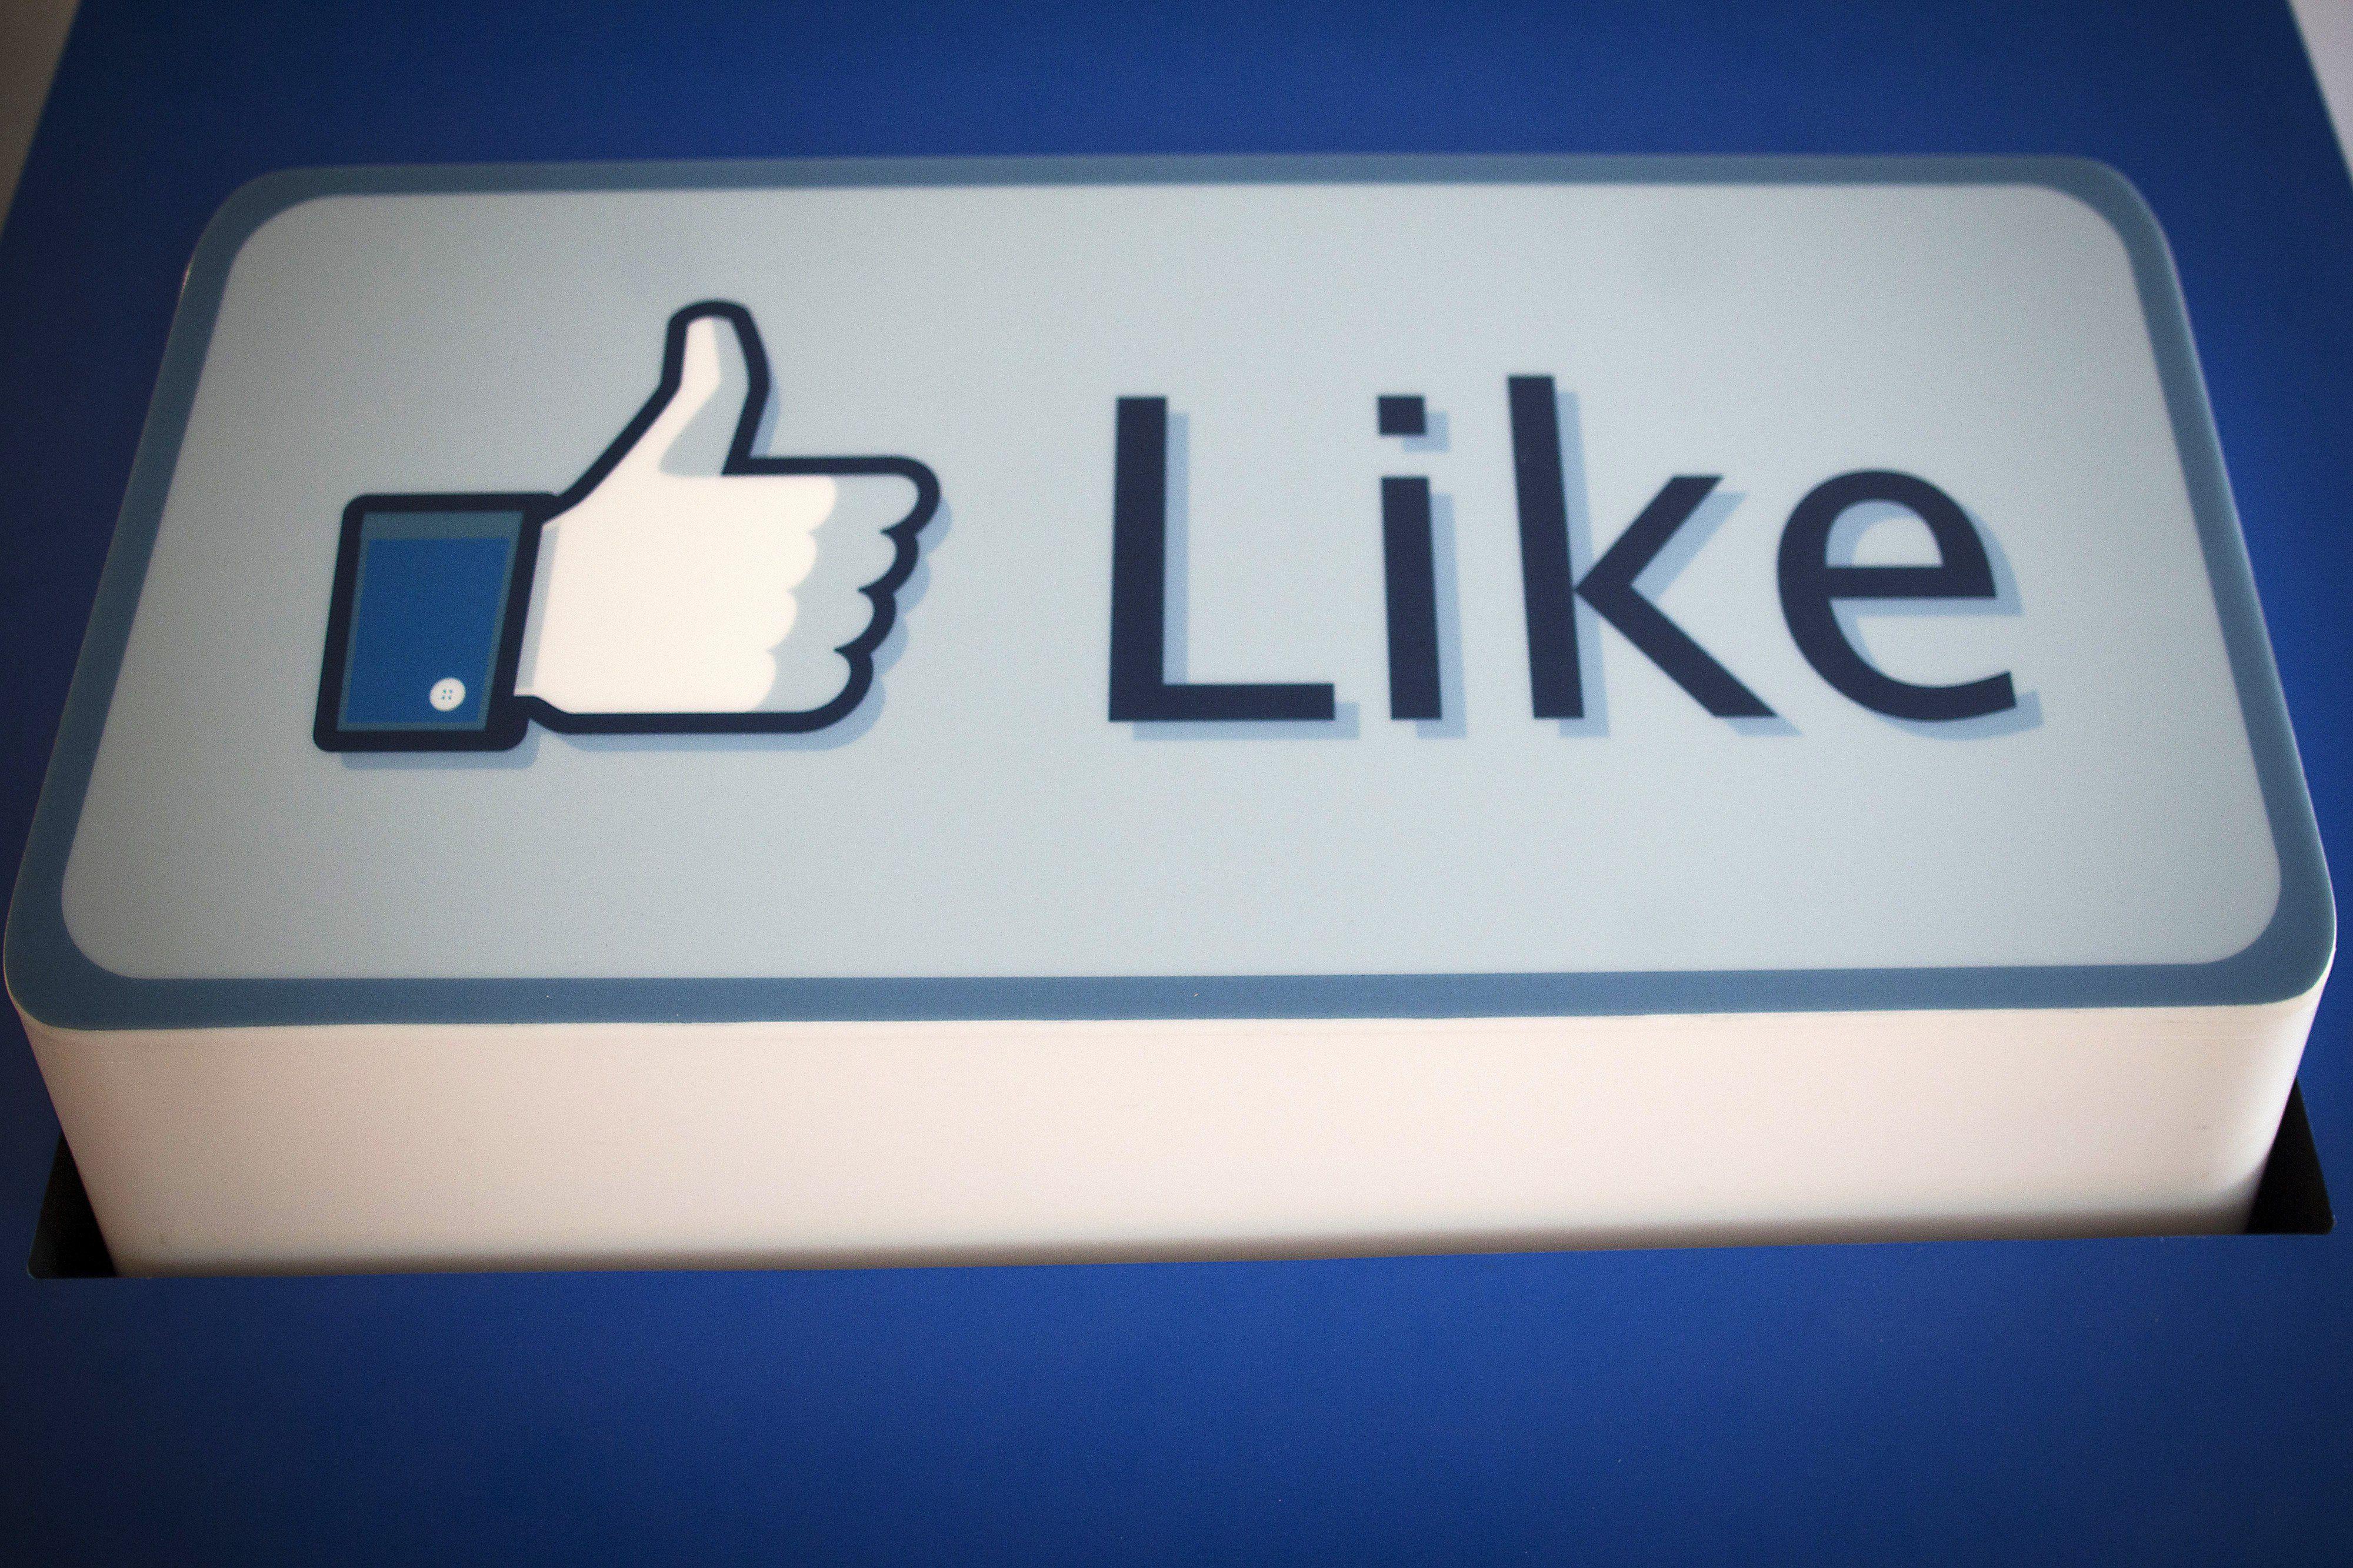 Facebook New Word Logo - 9 Super Simple Ways to Make Facebook Less Annoying | Time